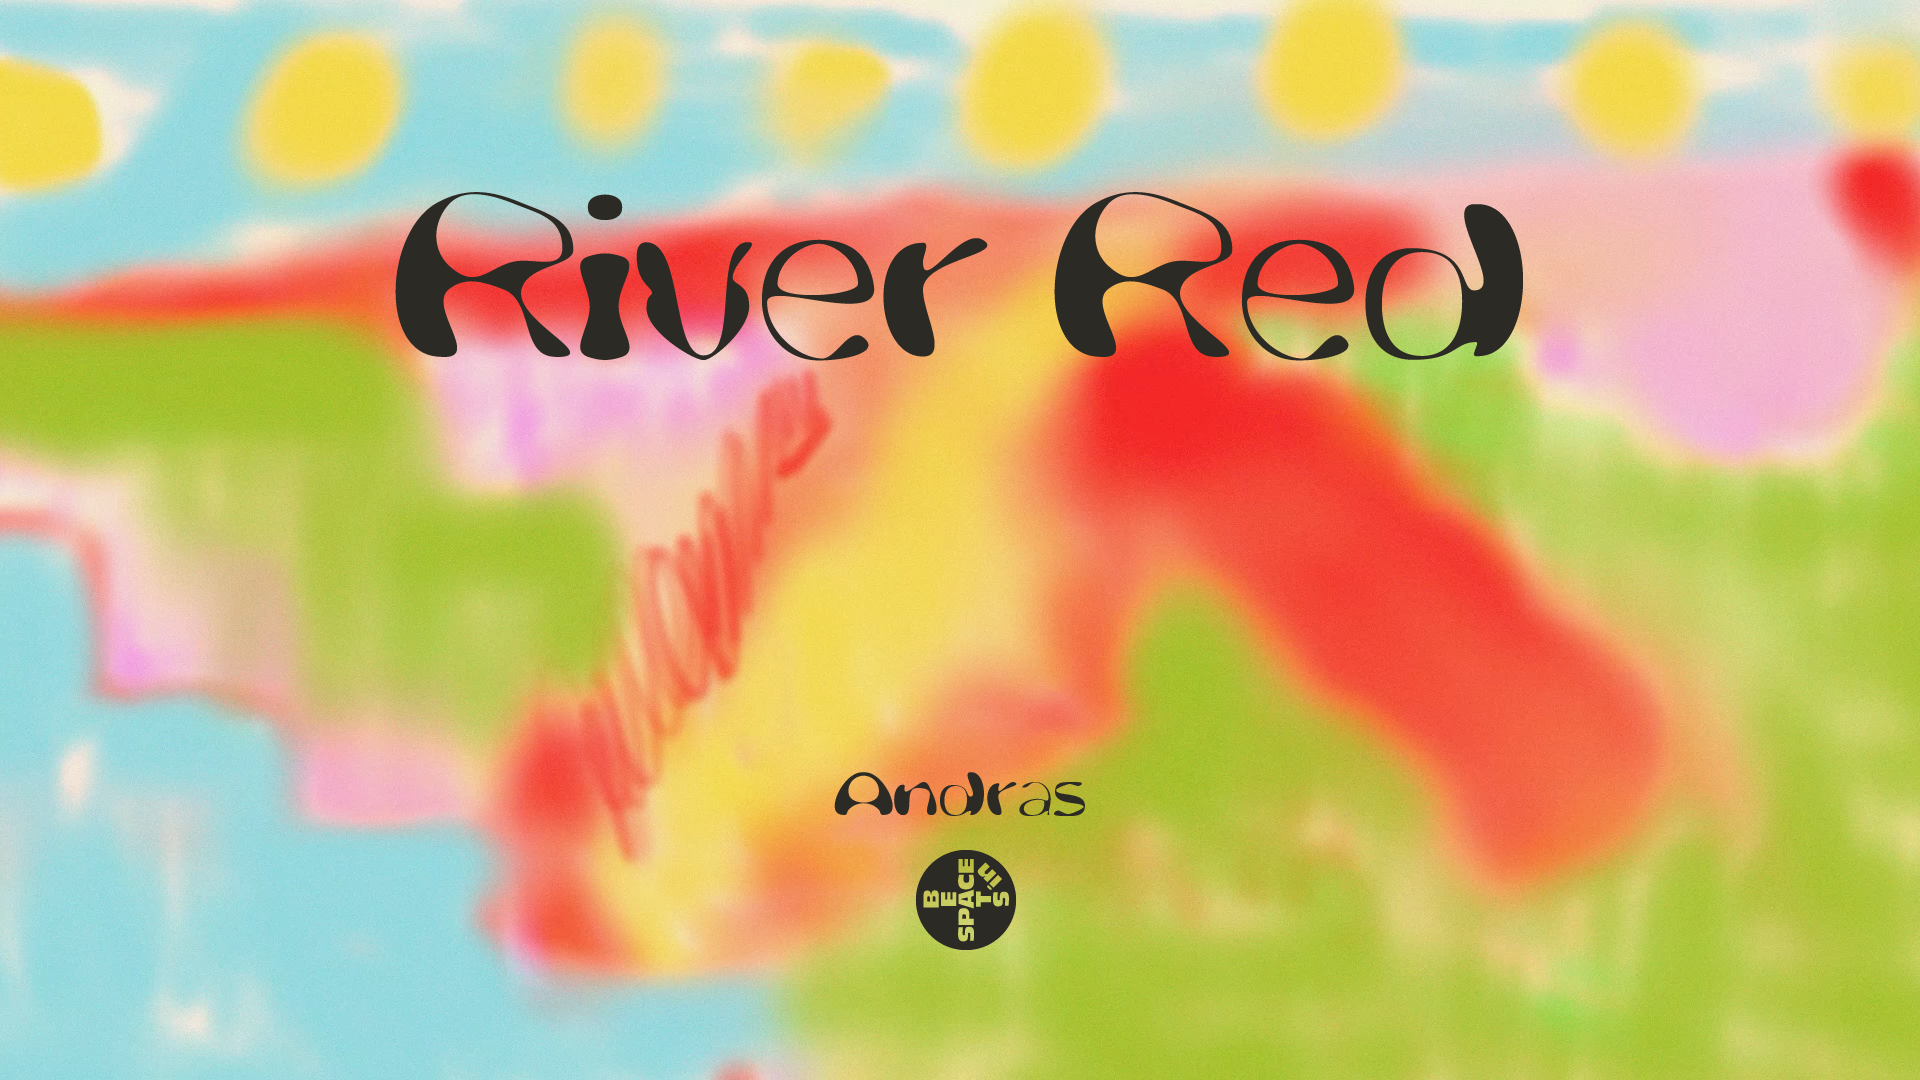 Link to Video for Andras – River Red